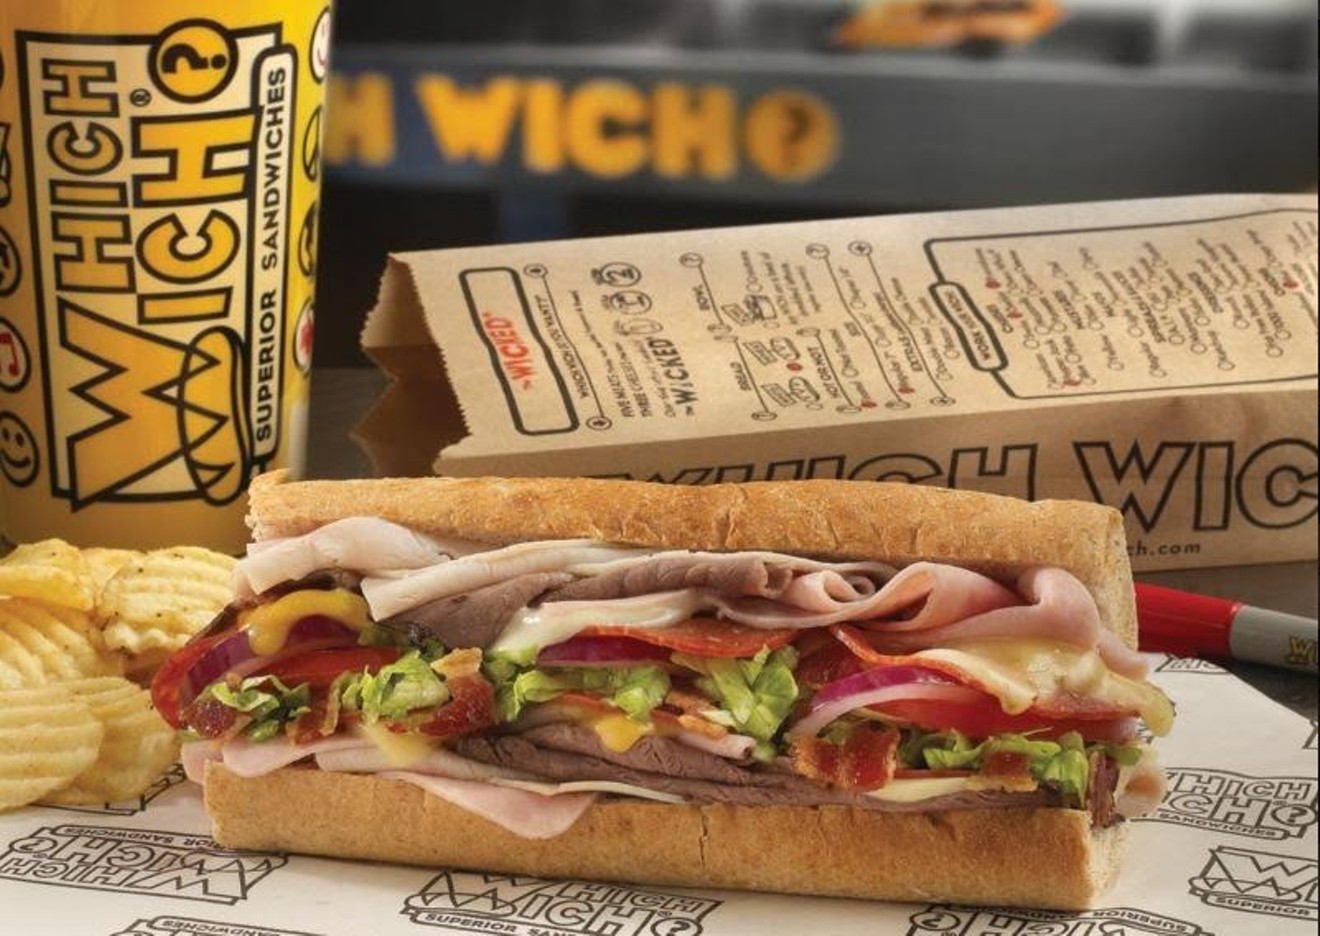 Large, meaty sandwiches are the name of the game at Which Wich.